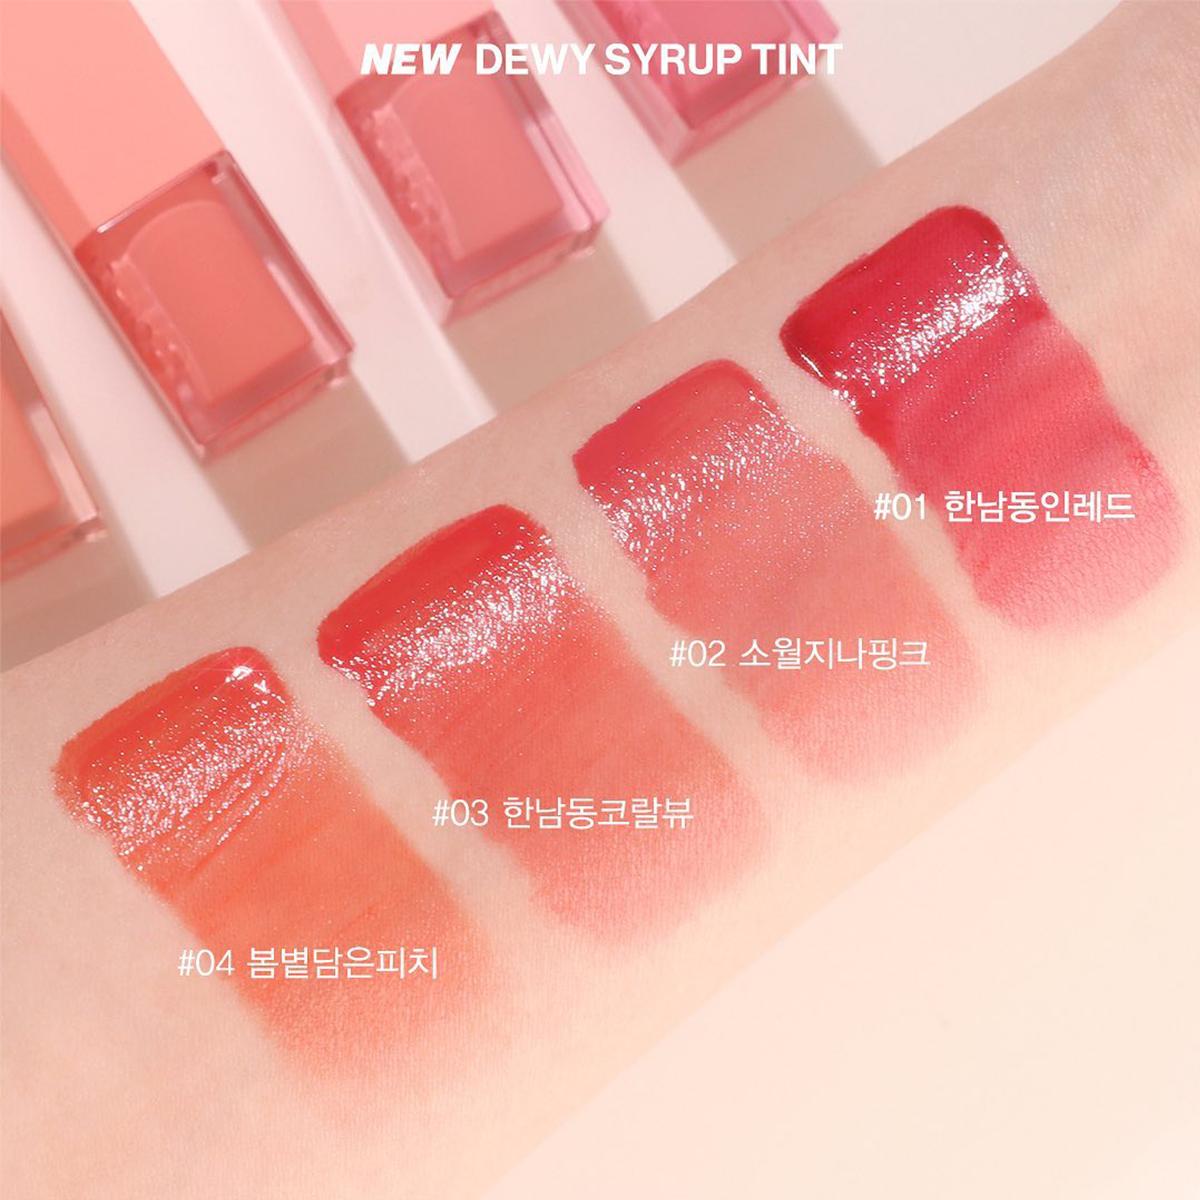 Dewy Syrup Tint (001 Hannam In Red)